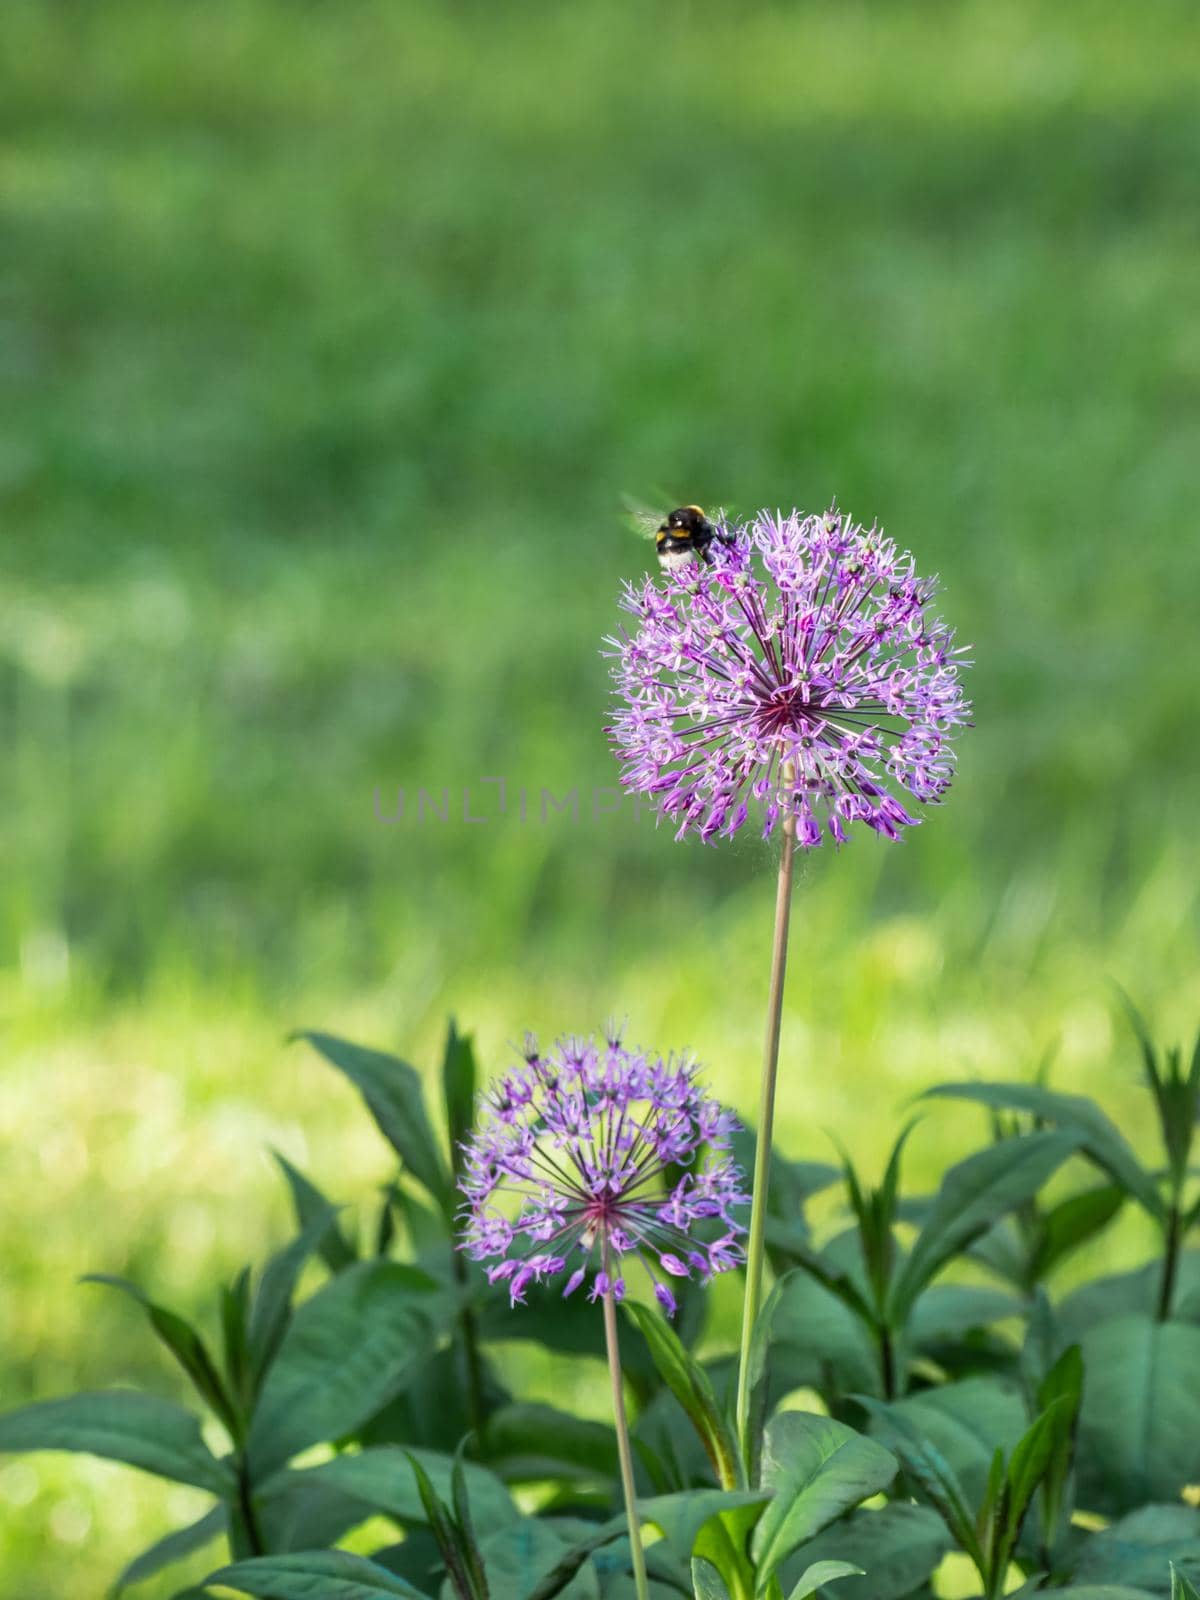 Bumblebee collects pollen from purple cultivated Allium. Natural summer background with flowers in bloom and insect.